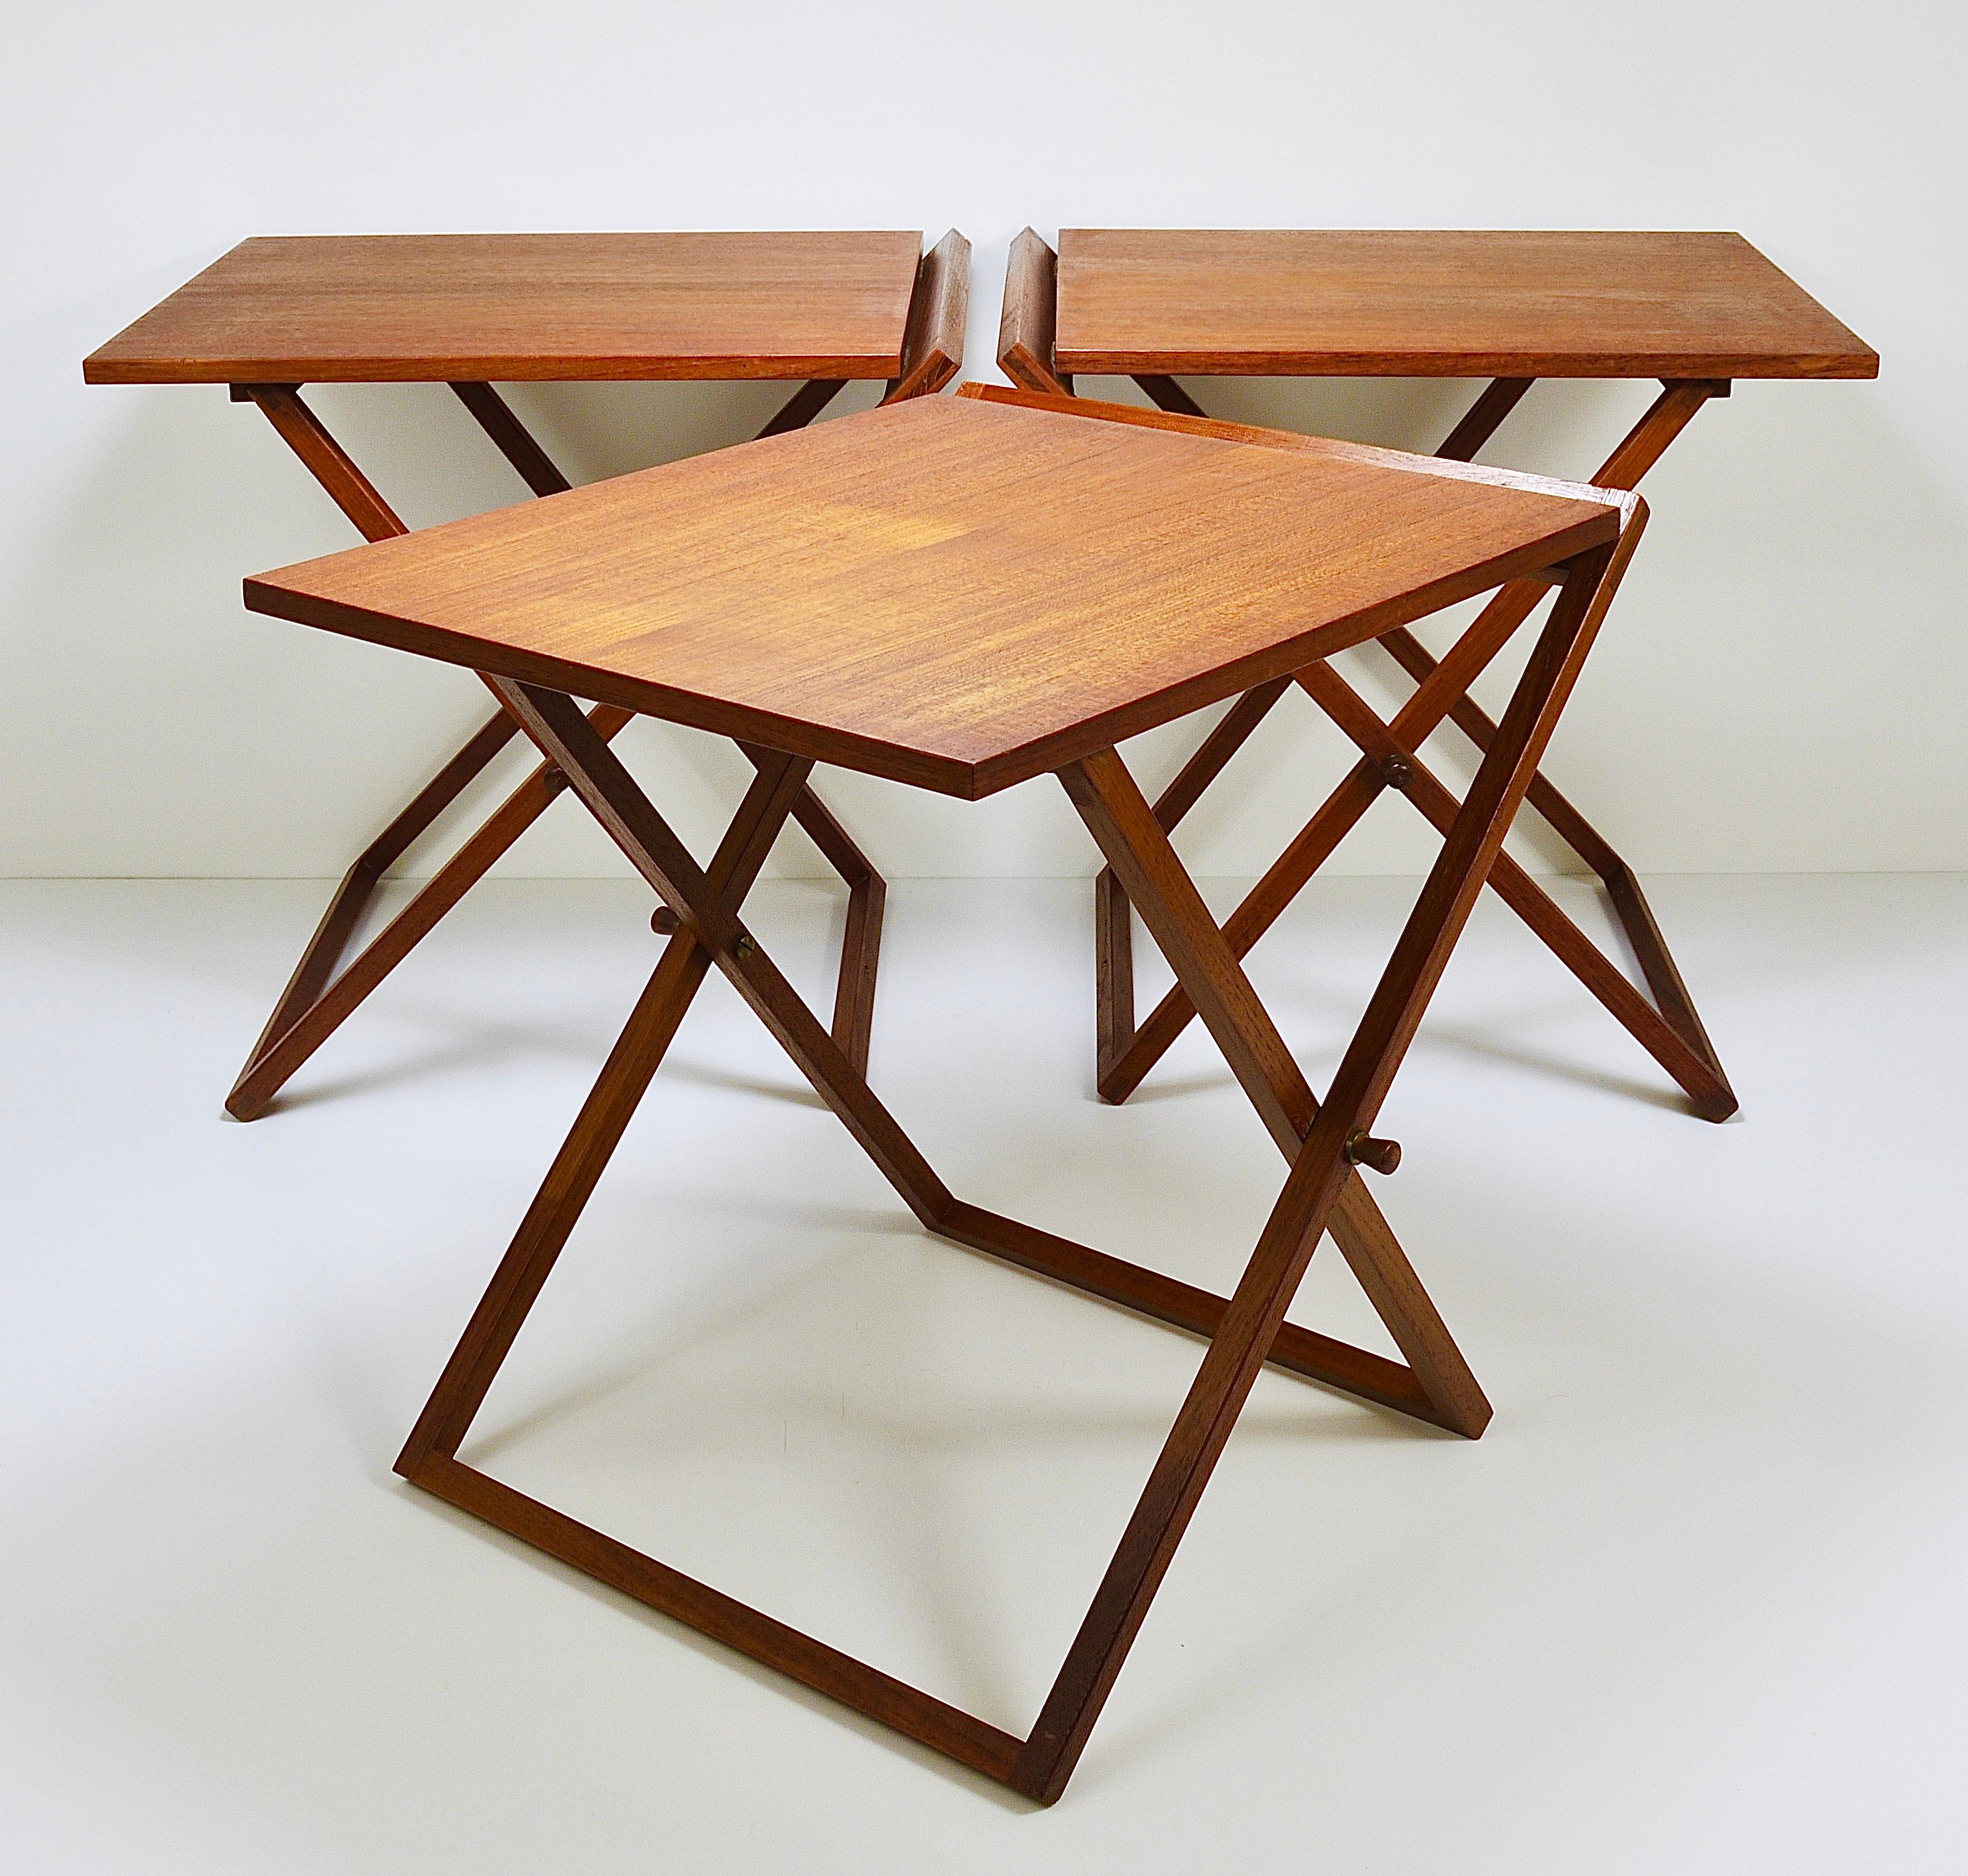 Up to three Mid-Century Modern fold out tables from the 1960s. Designed by Illum Wikkelso, executed by the Scandinavian manufacturer CFC Silkeborg Furniture Makers in Denmark. Sold and priced per piece. Very nicely manufactured, with nice sculptural